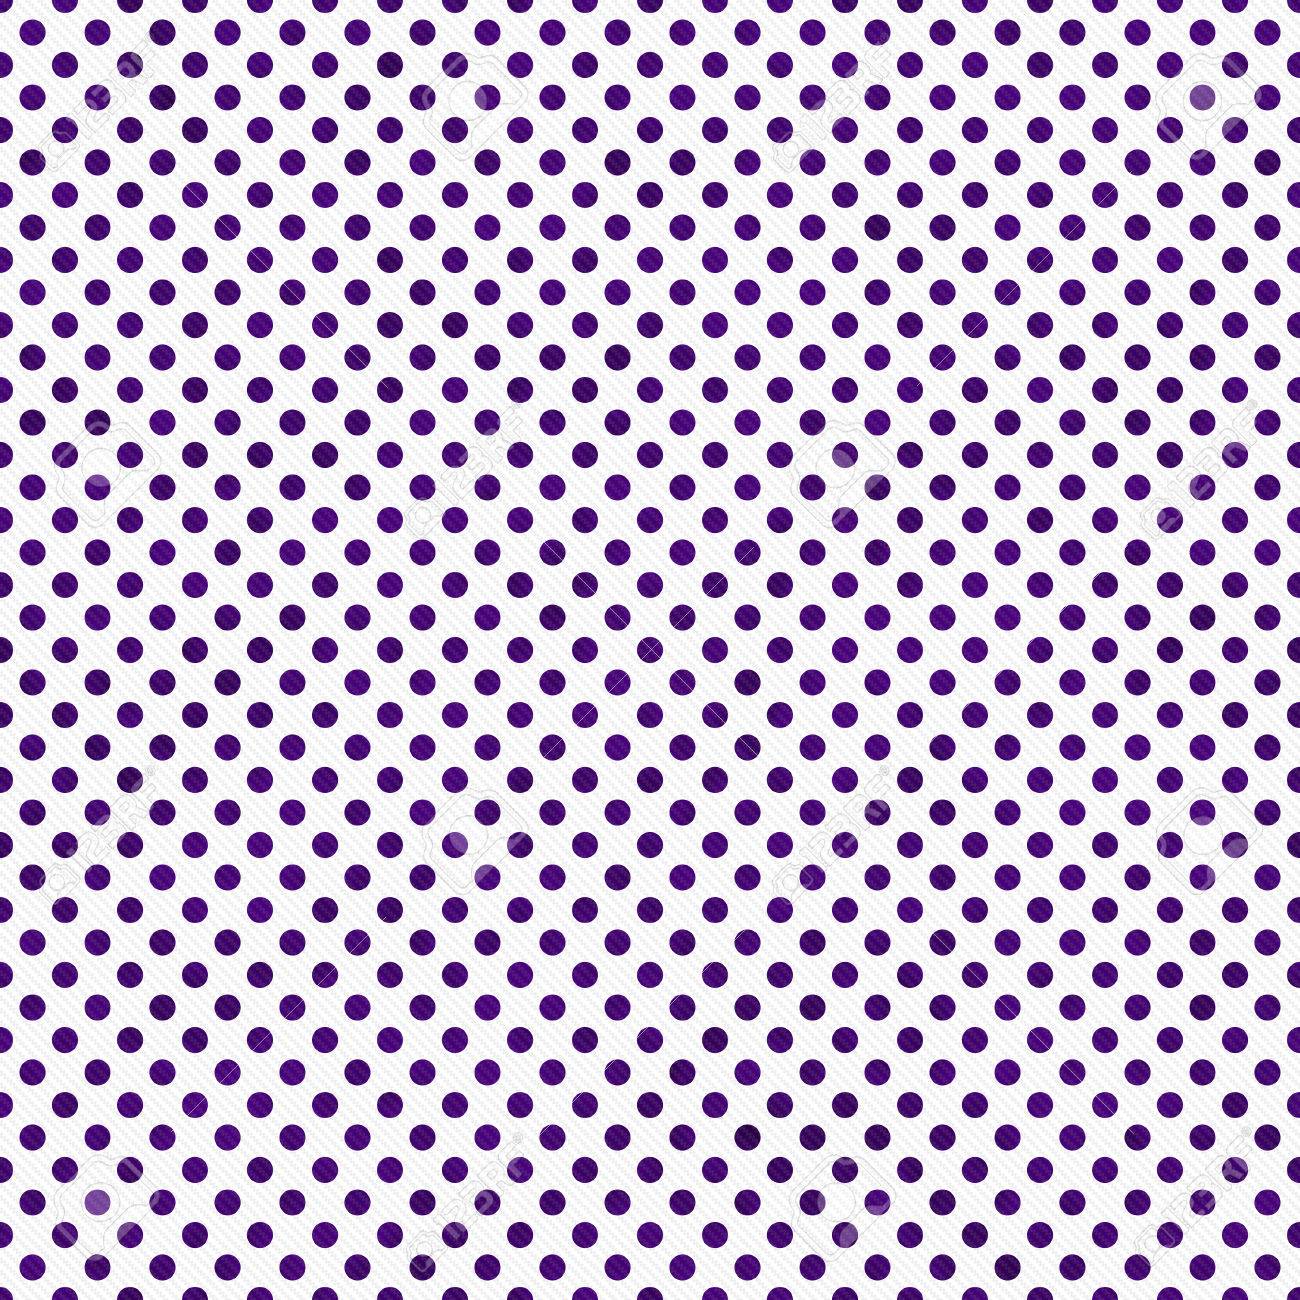 Dark Purple And White Small Polka Dots Pattern Repeat Background